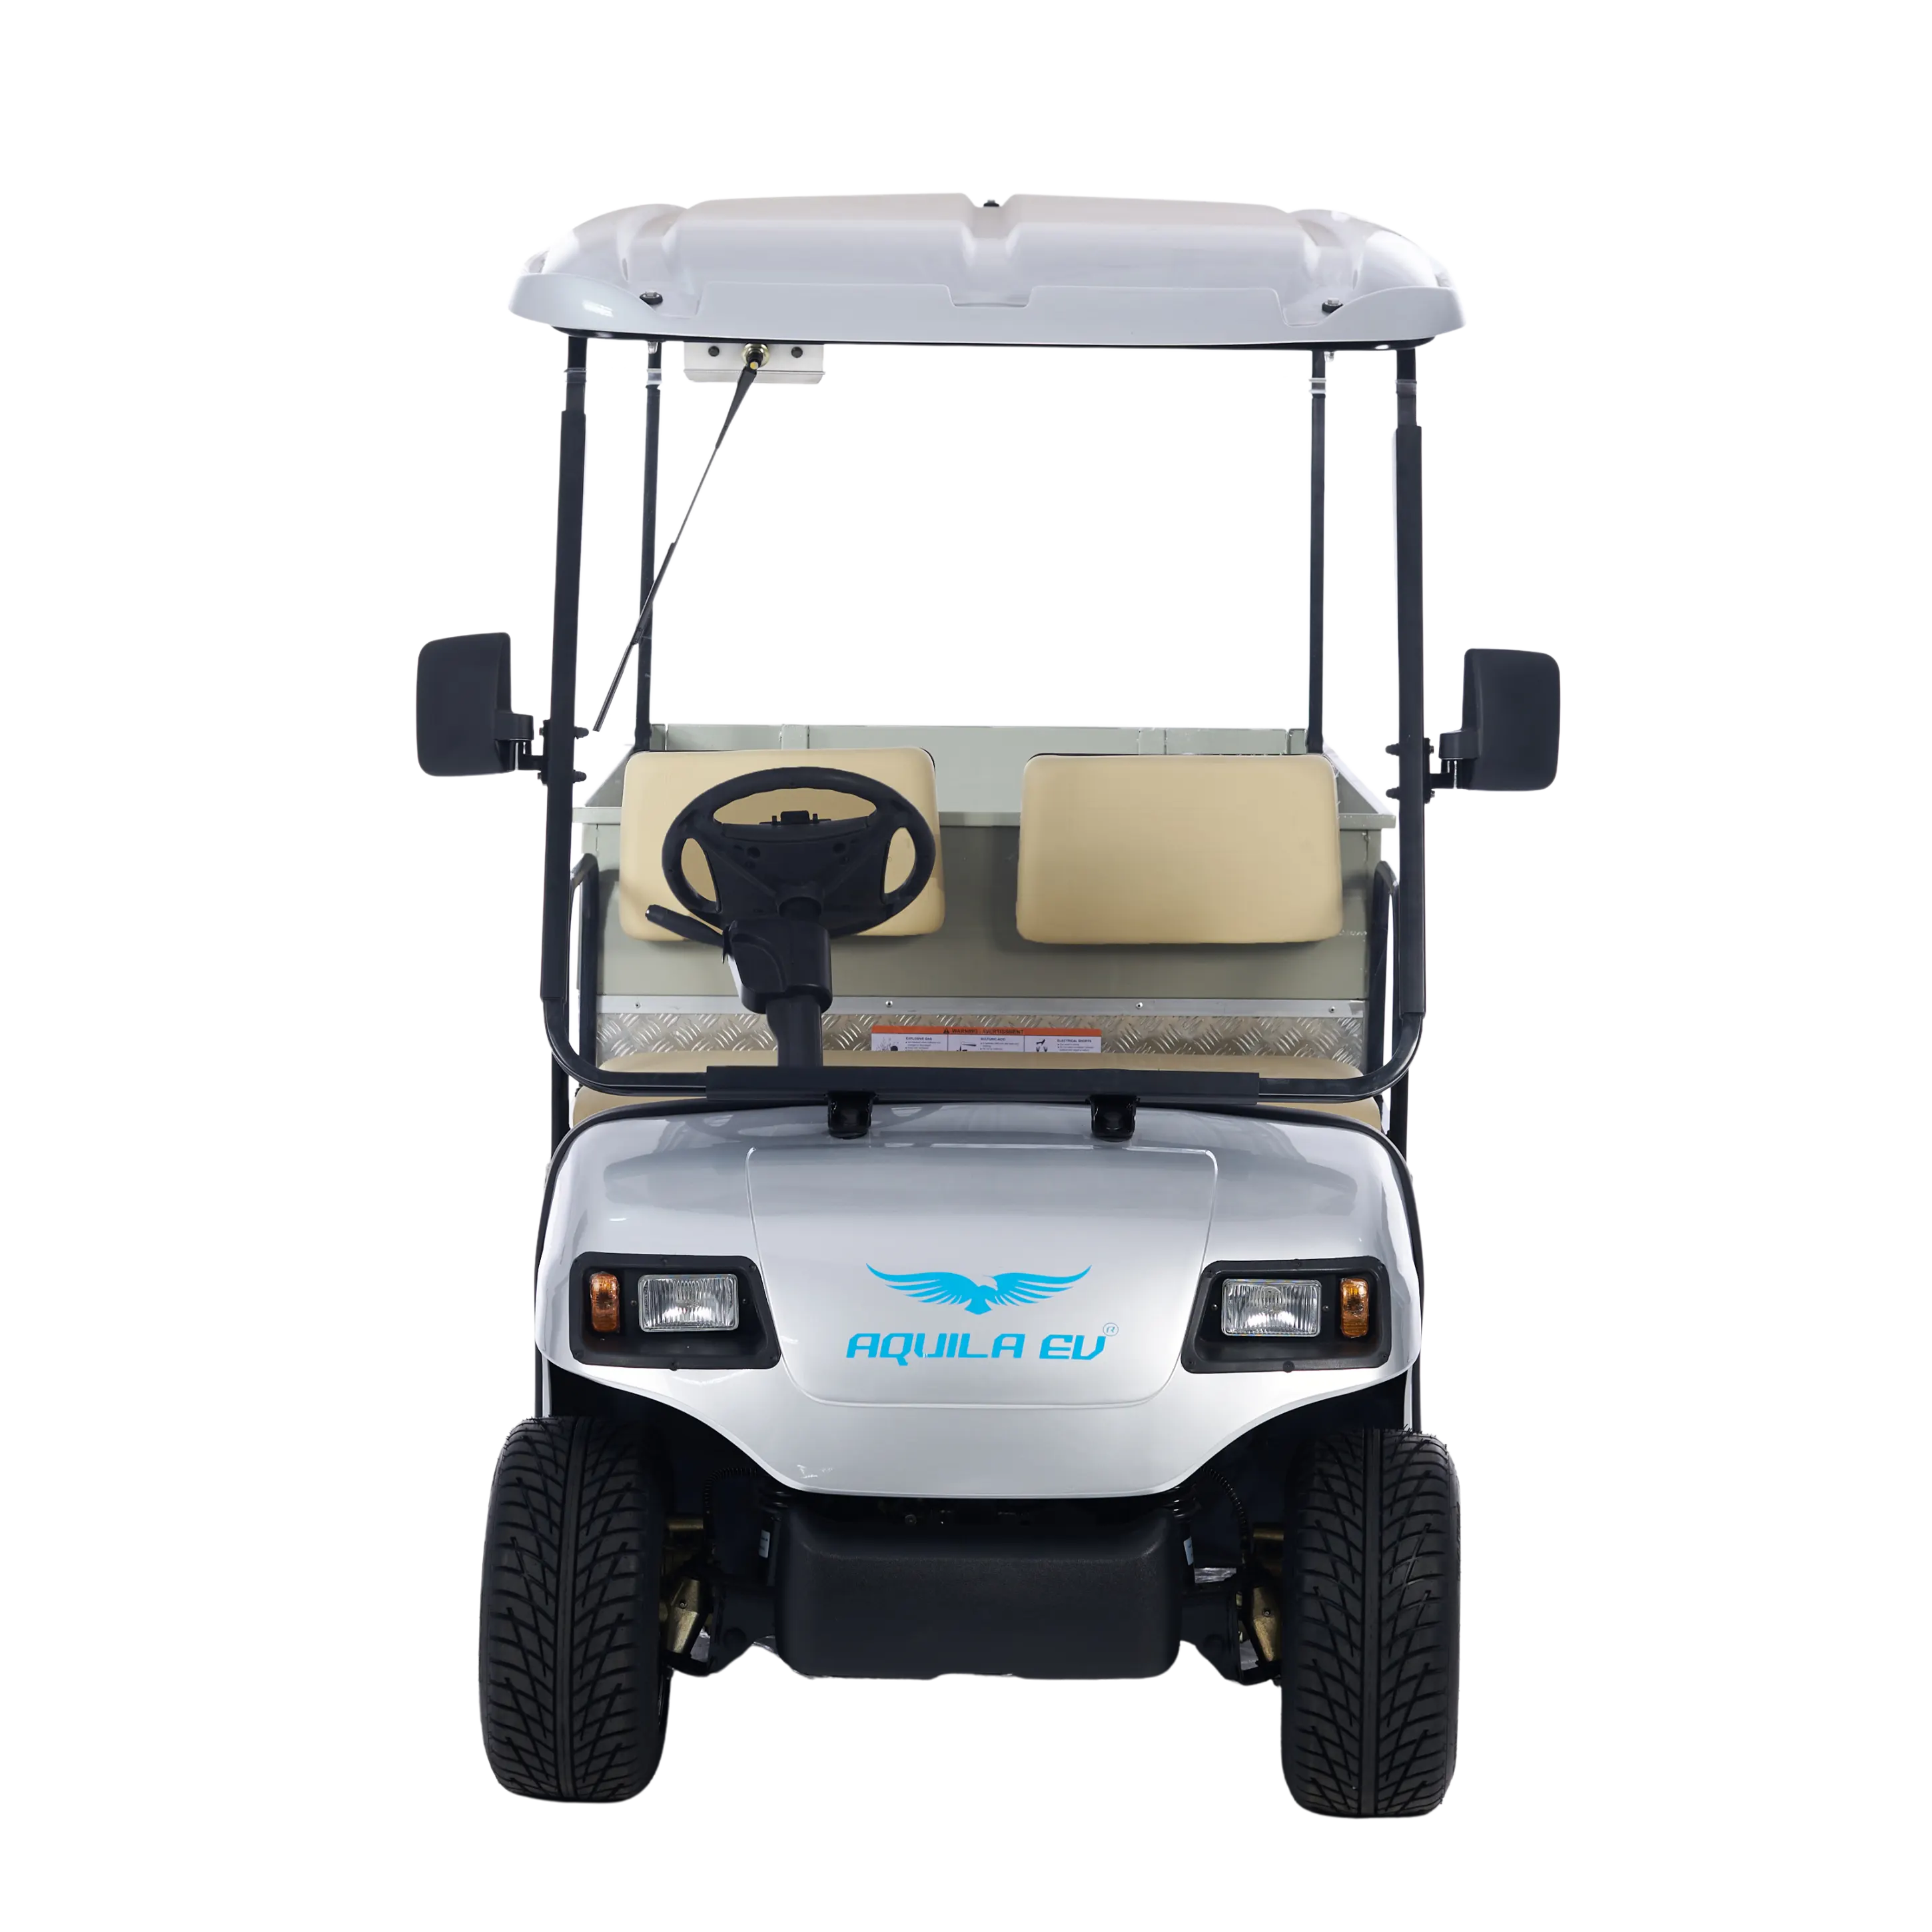 2 Seater Electric Cargo Vehicle - Tri Electric
                                        